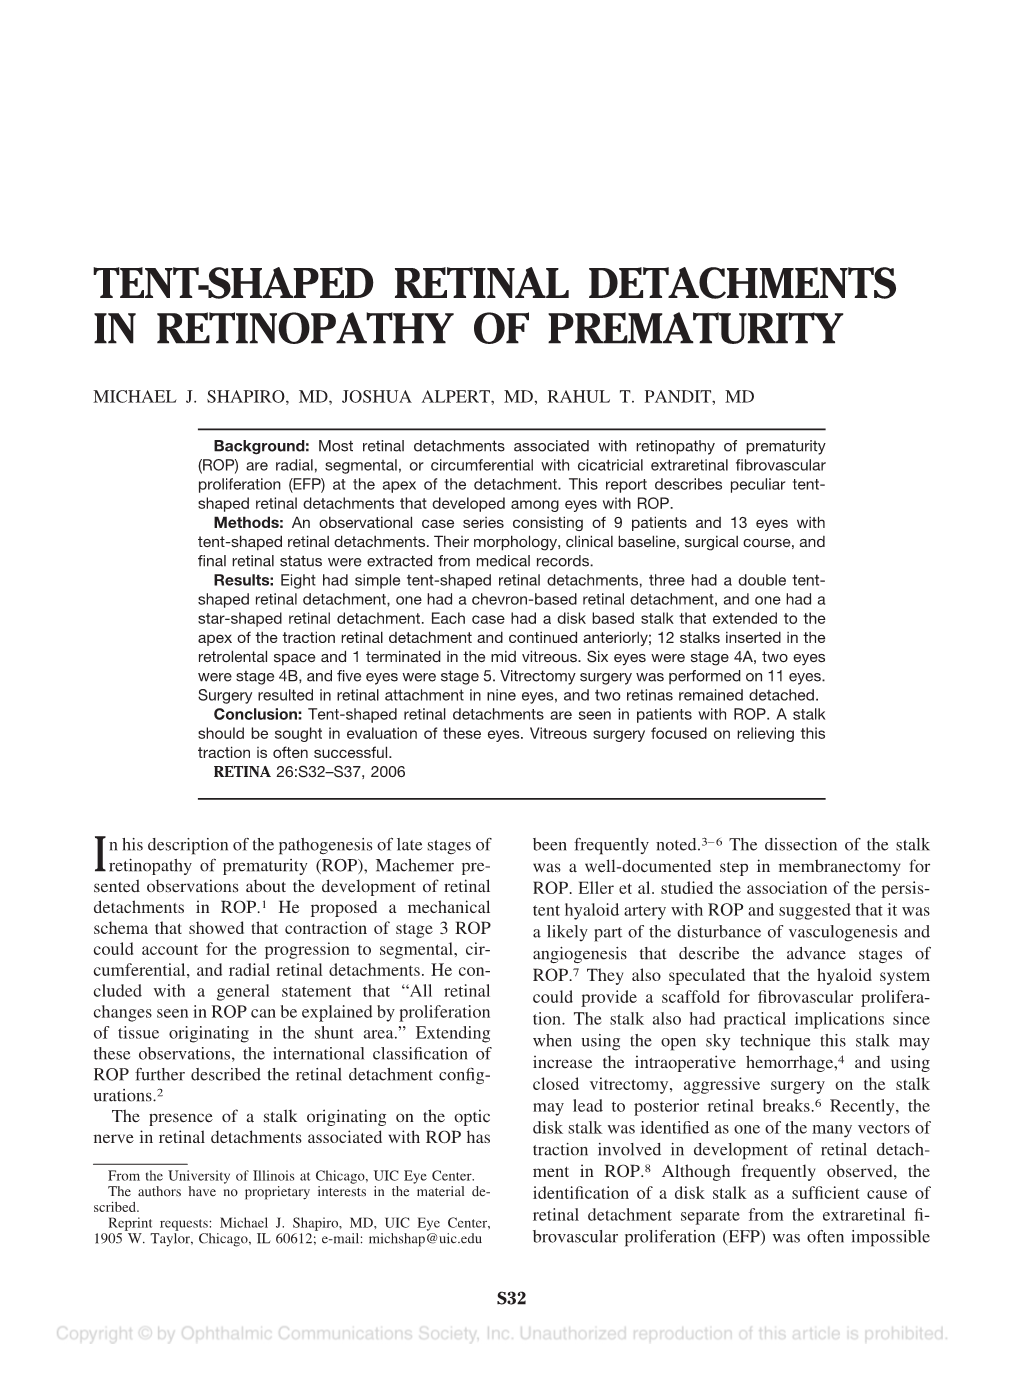 Tent-Shaped Retinal Detachments in Retinopathy of Prematurity